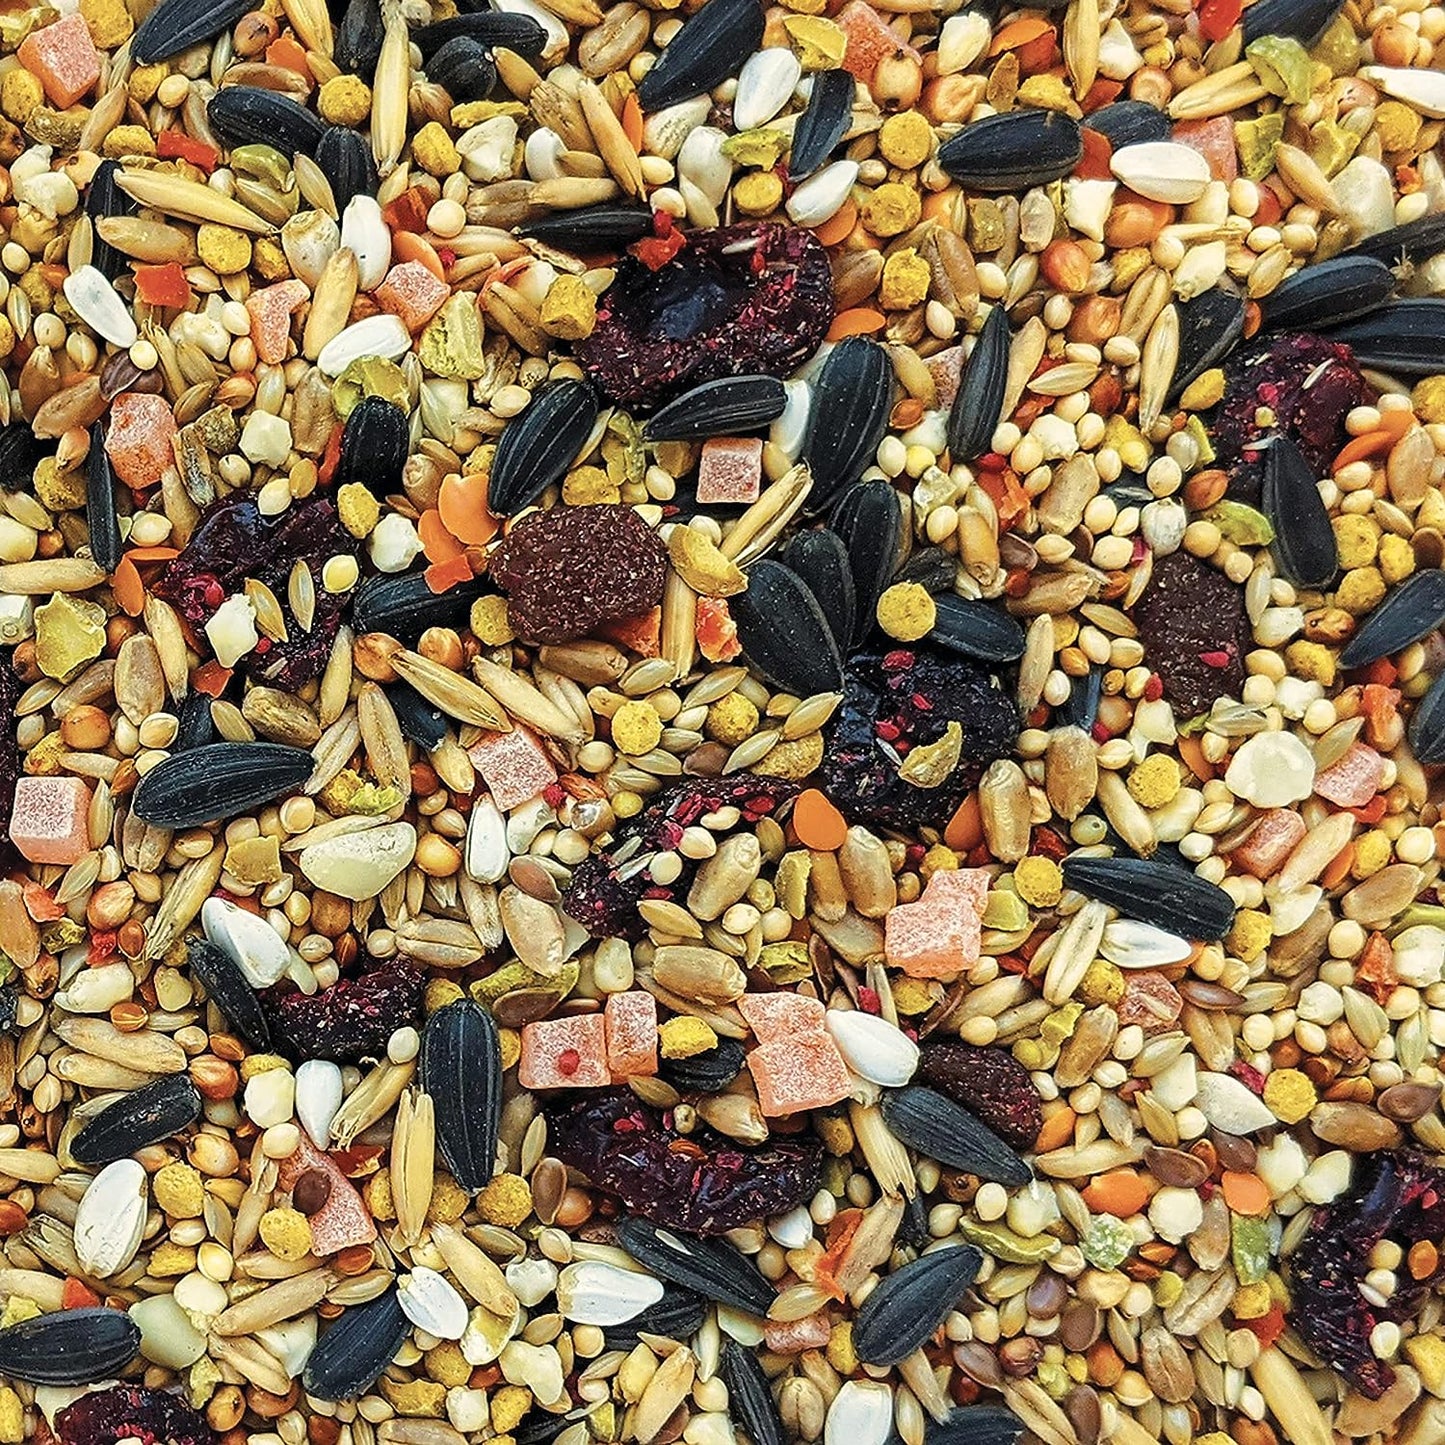 Hagen Gourmet Seed Mix for Cockatiels and Small Hookbills